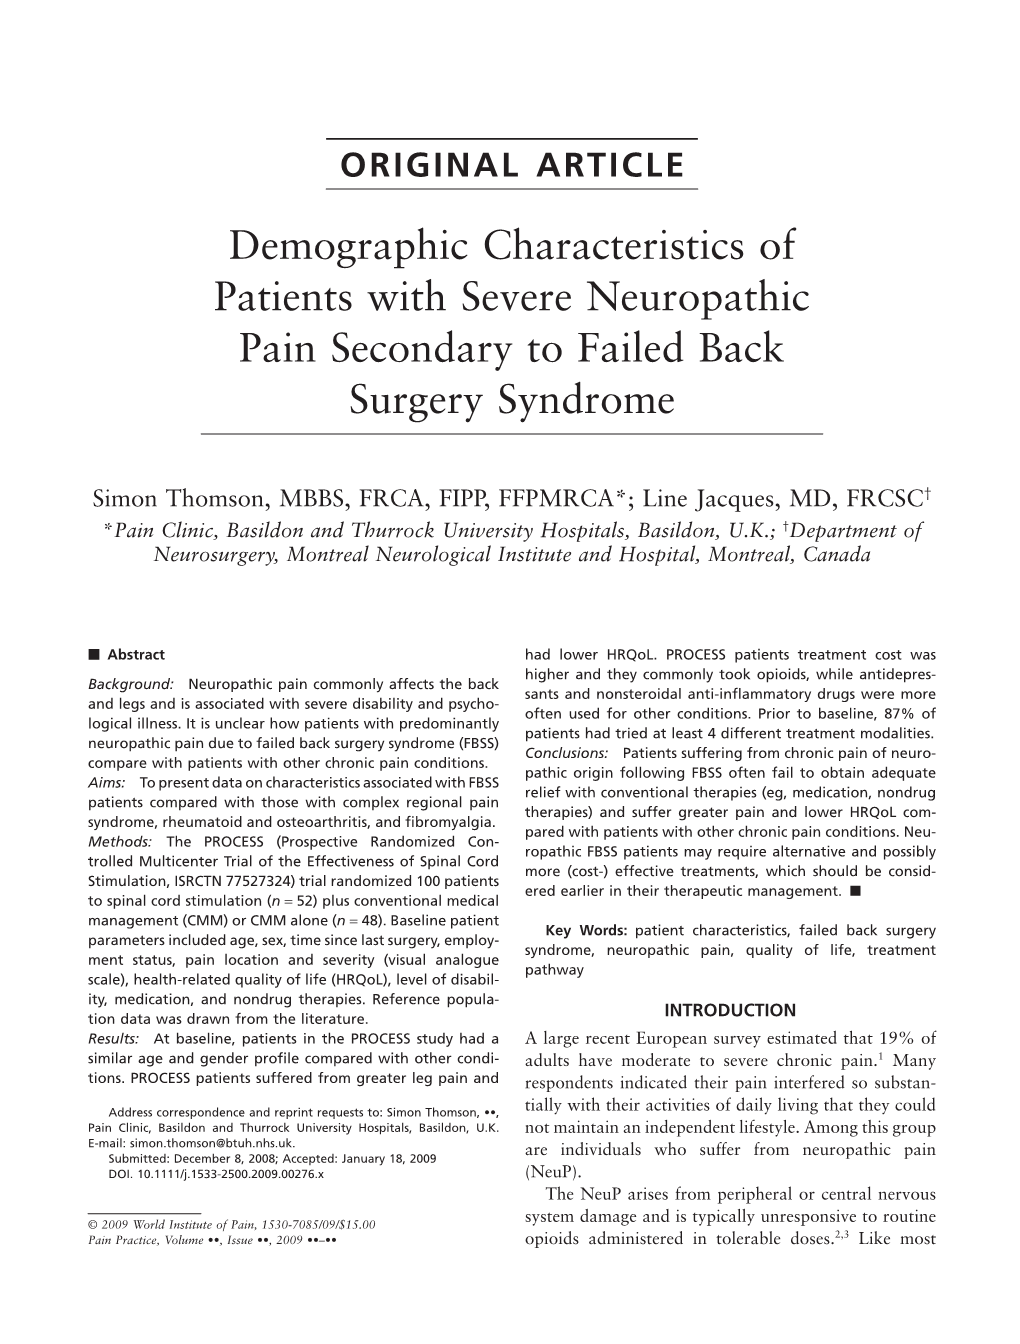 Demographic Characteristics of Patients with Severe Neuropathic Pain Secondary to Failed Back Surgery Syndrome